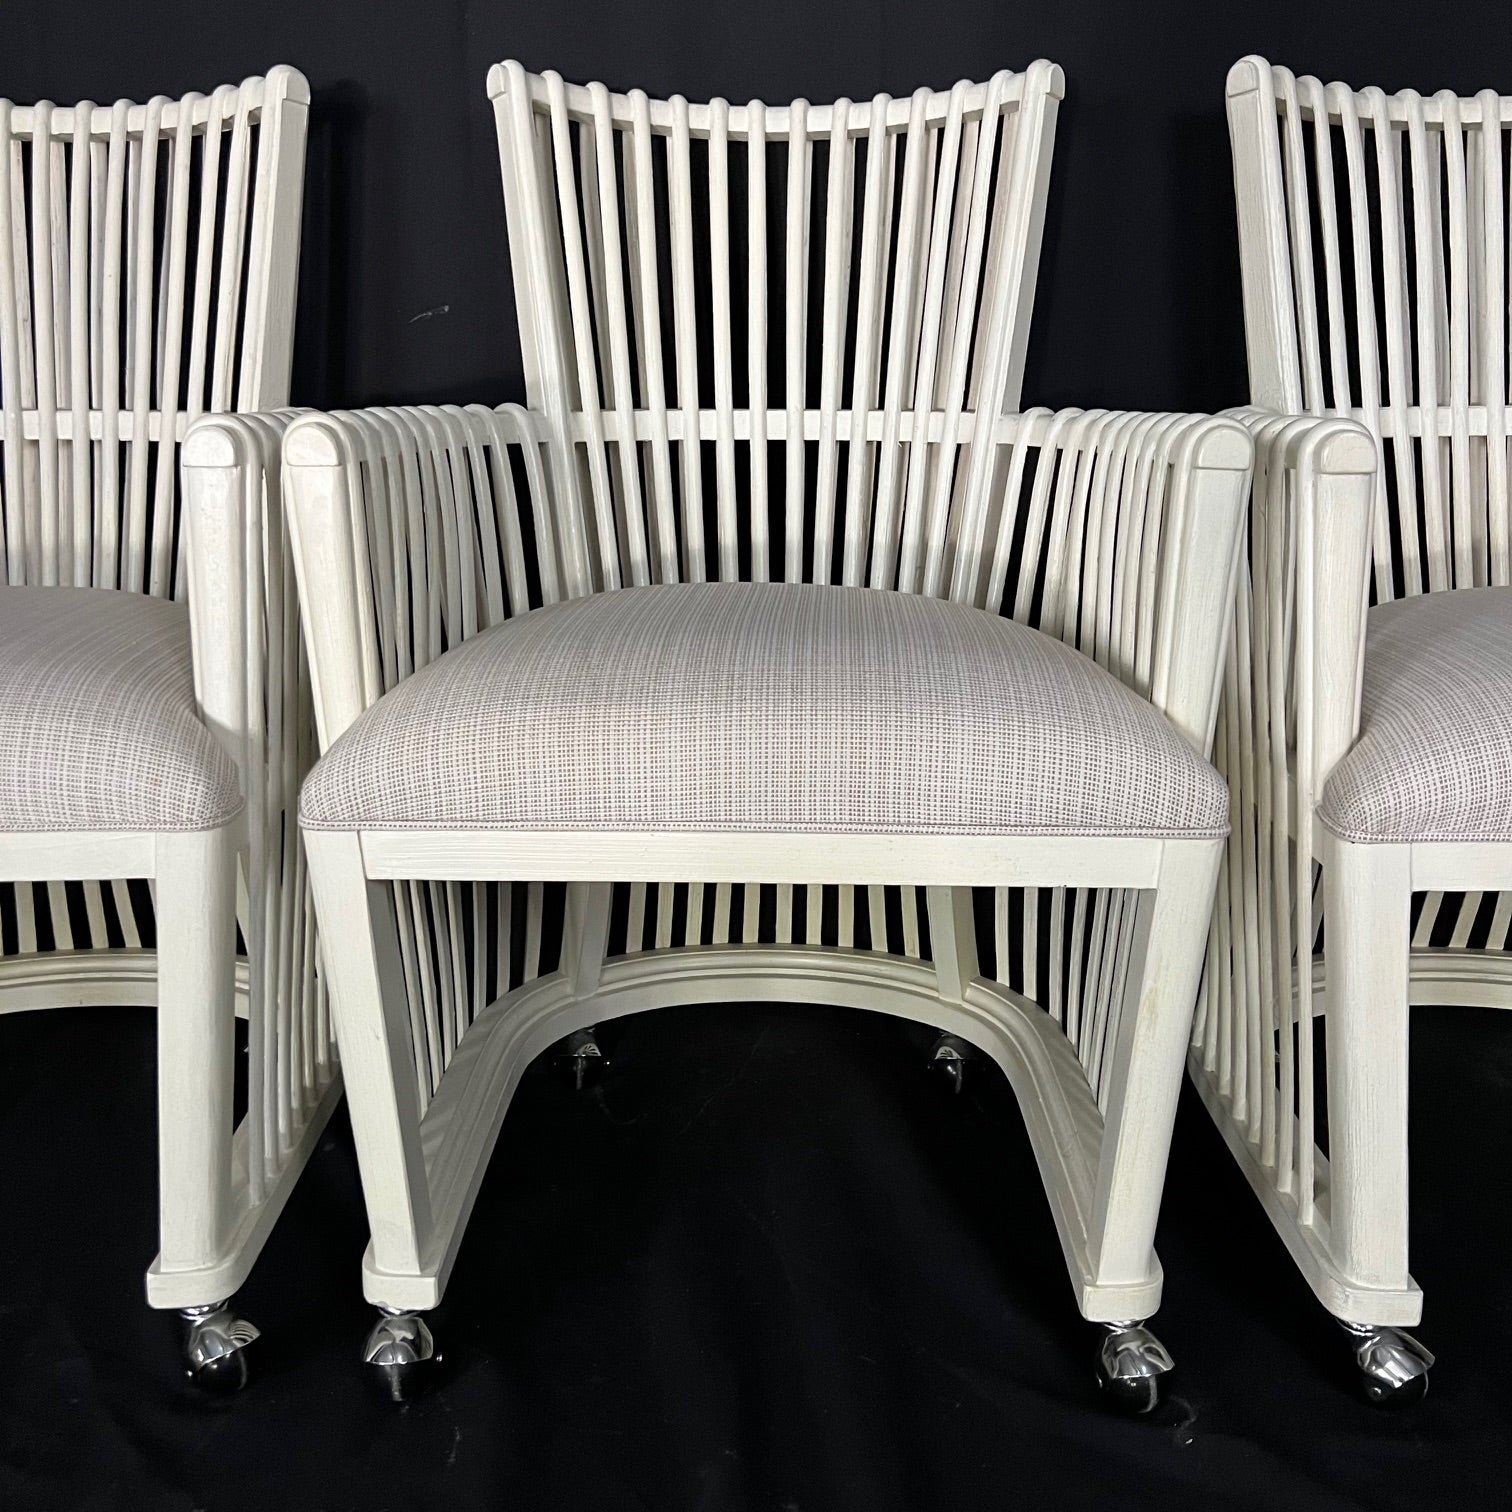 Elegant and traditional yet contemporary chic set of bent rattan dining or side chairs on casters. Each chair is super comfortable and sturdy, with mortise and tenon construction. Strong case backs are recessed into each end, with a well mounted top